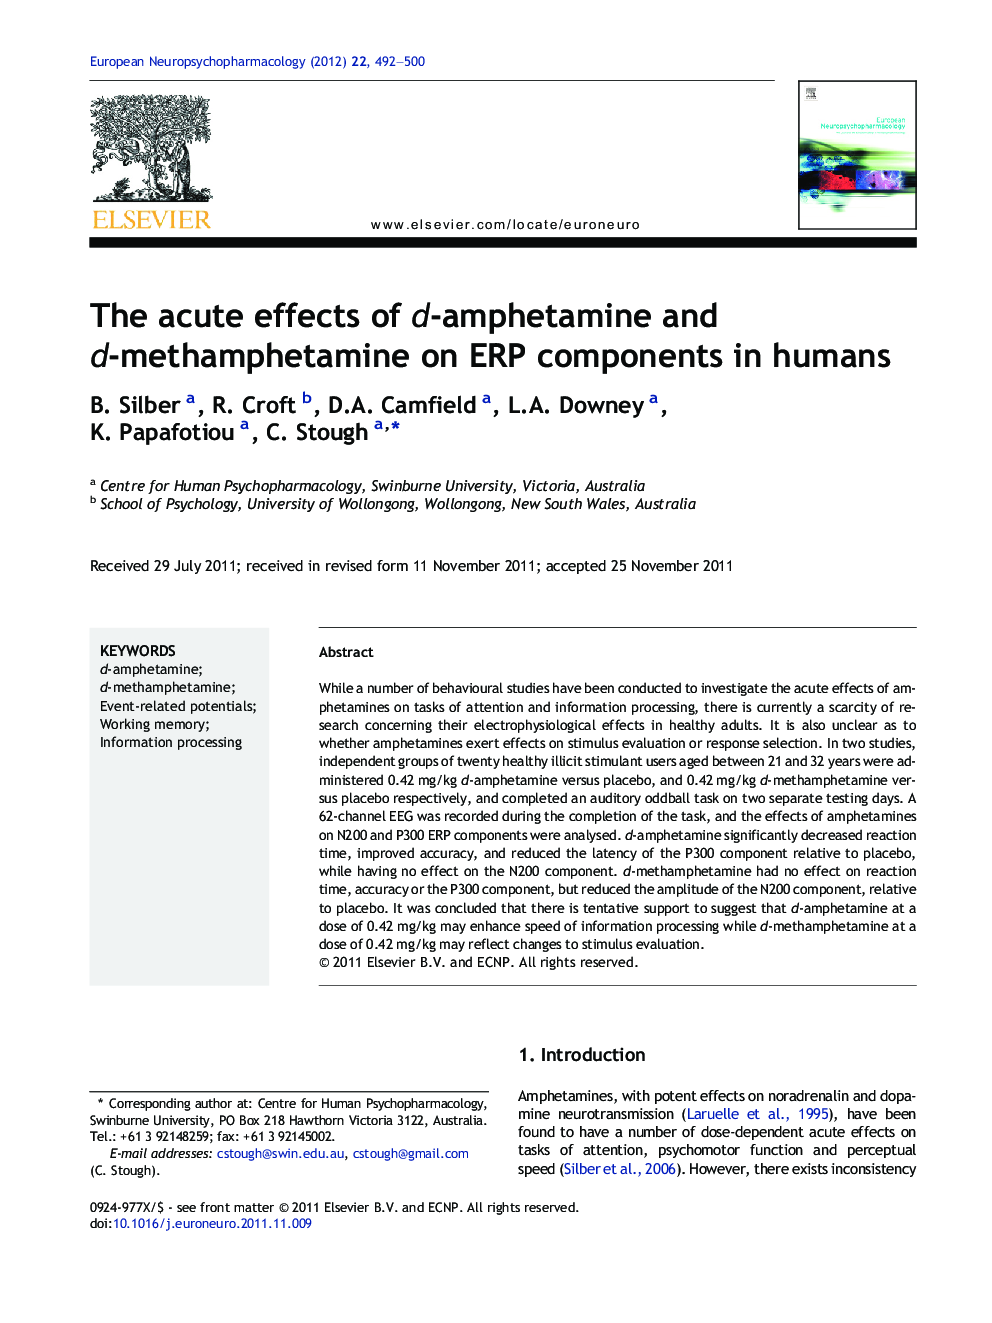 The acute effects of d-amphetamine and d-methamphetamine on ERP components in humans